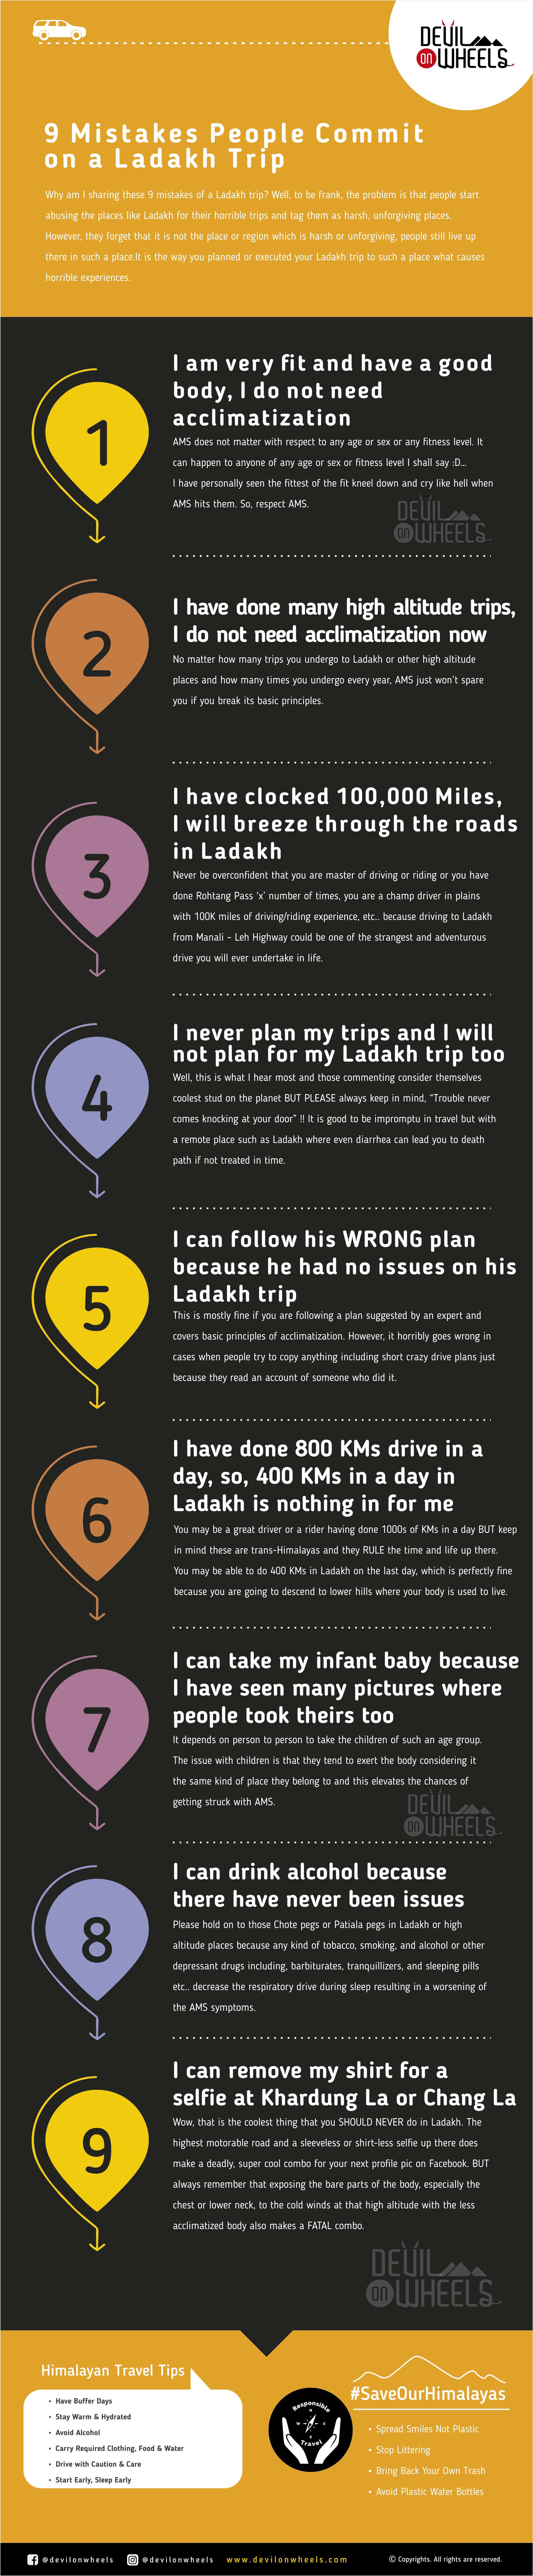 Mistakes people commit on a Ladakh trip